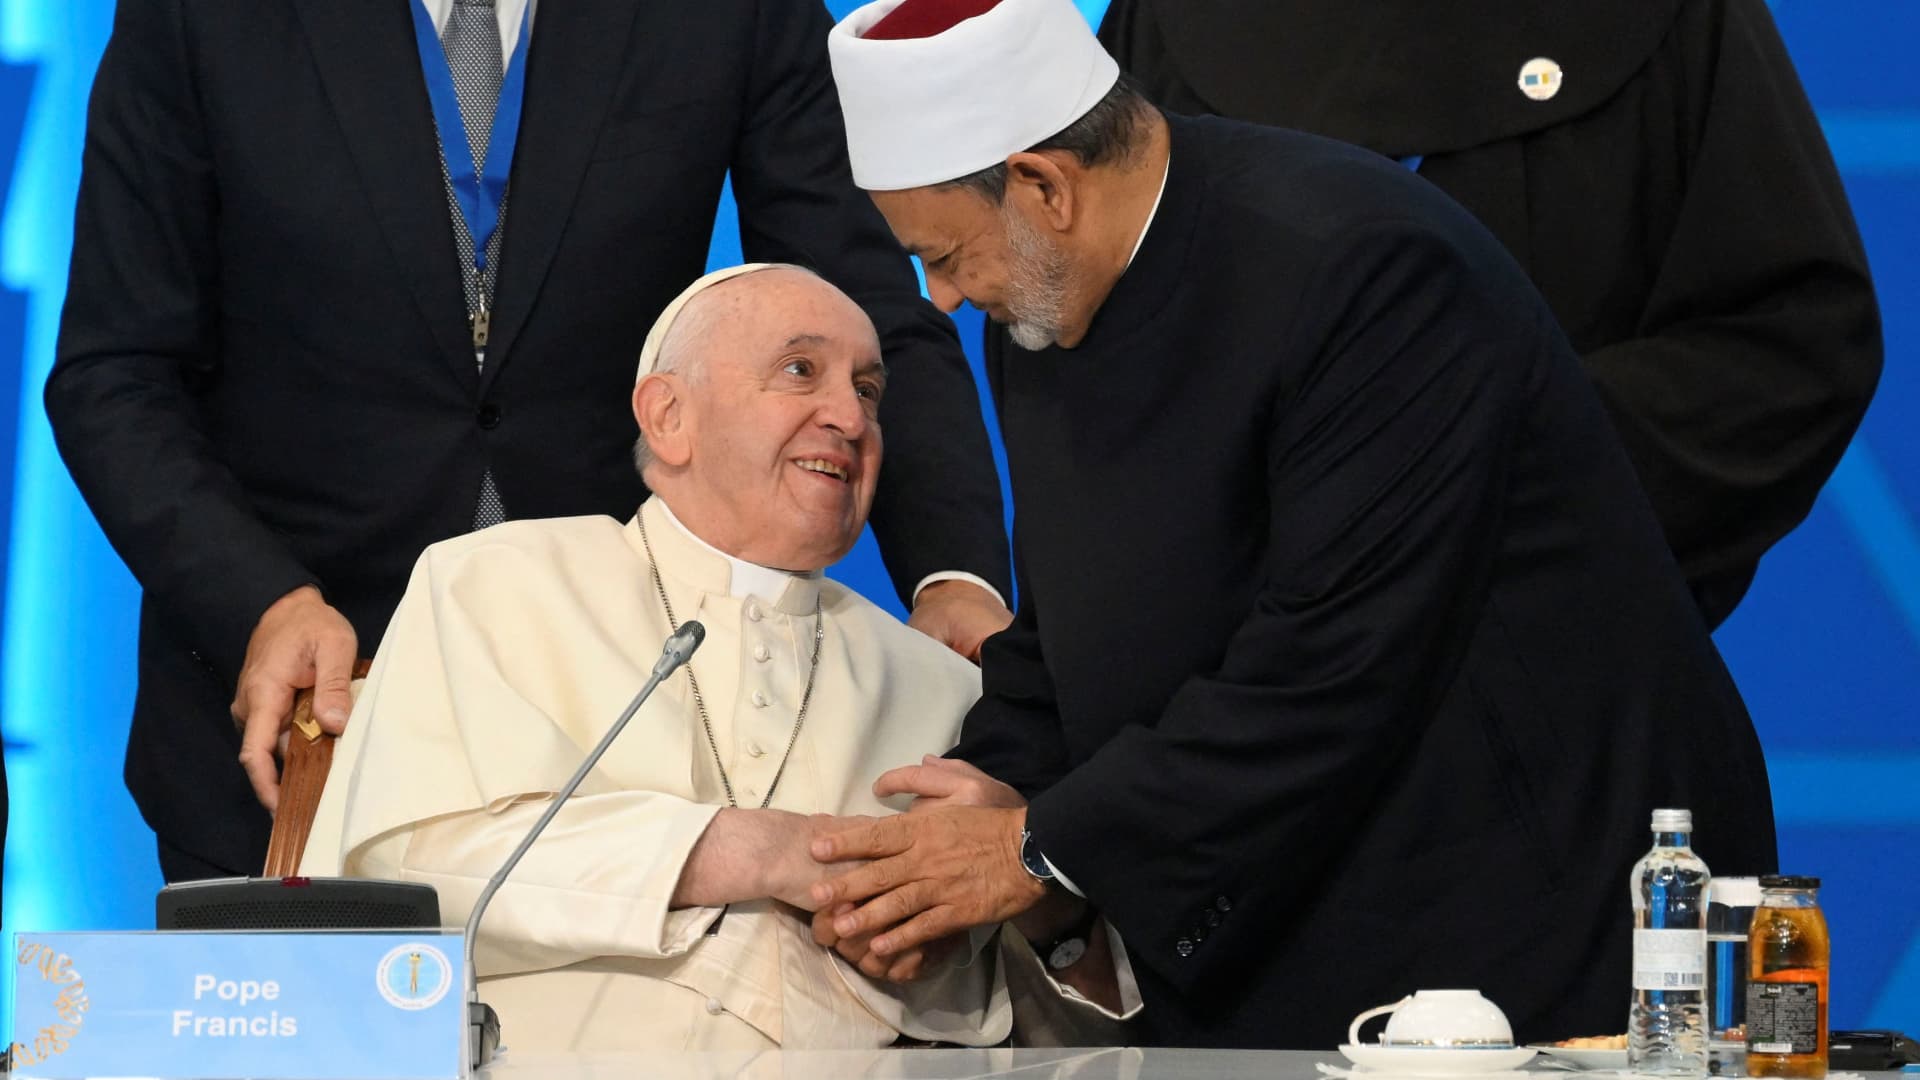 Sheikh Ahmed el-Tayeb, Grand Imam of Cairo's Al-Azhar Mosque greets Pope Francis during the plenary session of the VII Congress of the Leaders of World and Traditional Religions in Nur-Sultan, Kazakhstan, September 14, 2022.